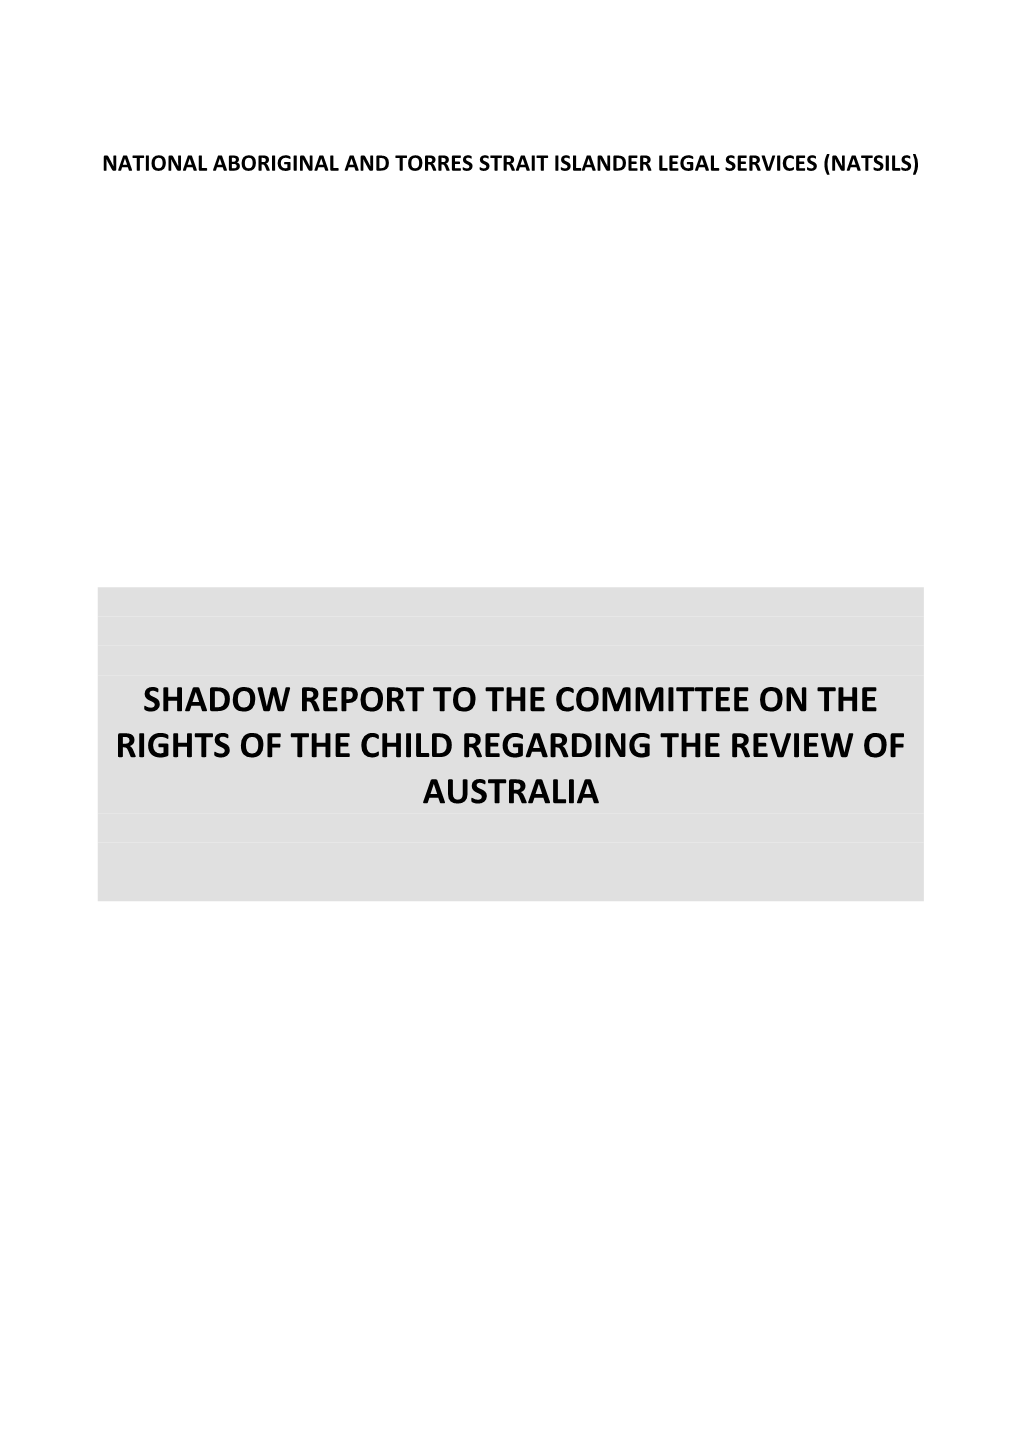 Natsils Shadow Report to the Committee on the Rights of Child July 2011